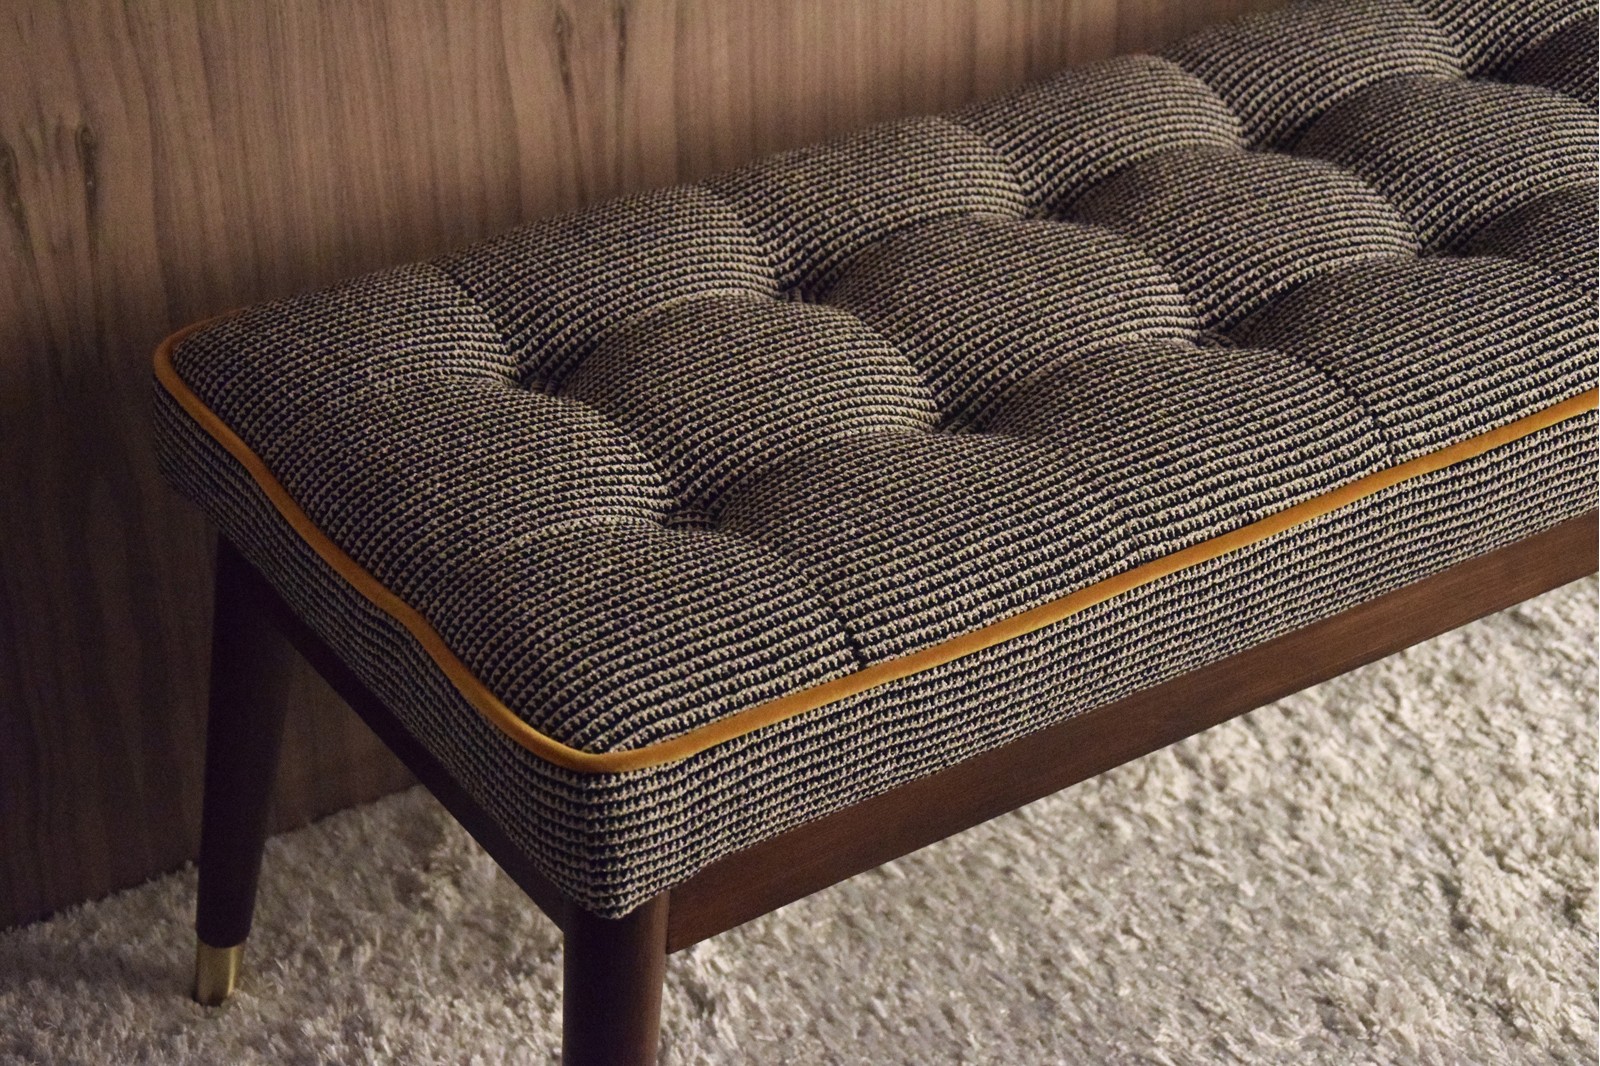 BENCH. BEIGE GREY AND BLACK PATTERN FABRIC